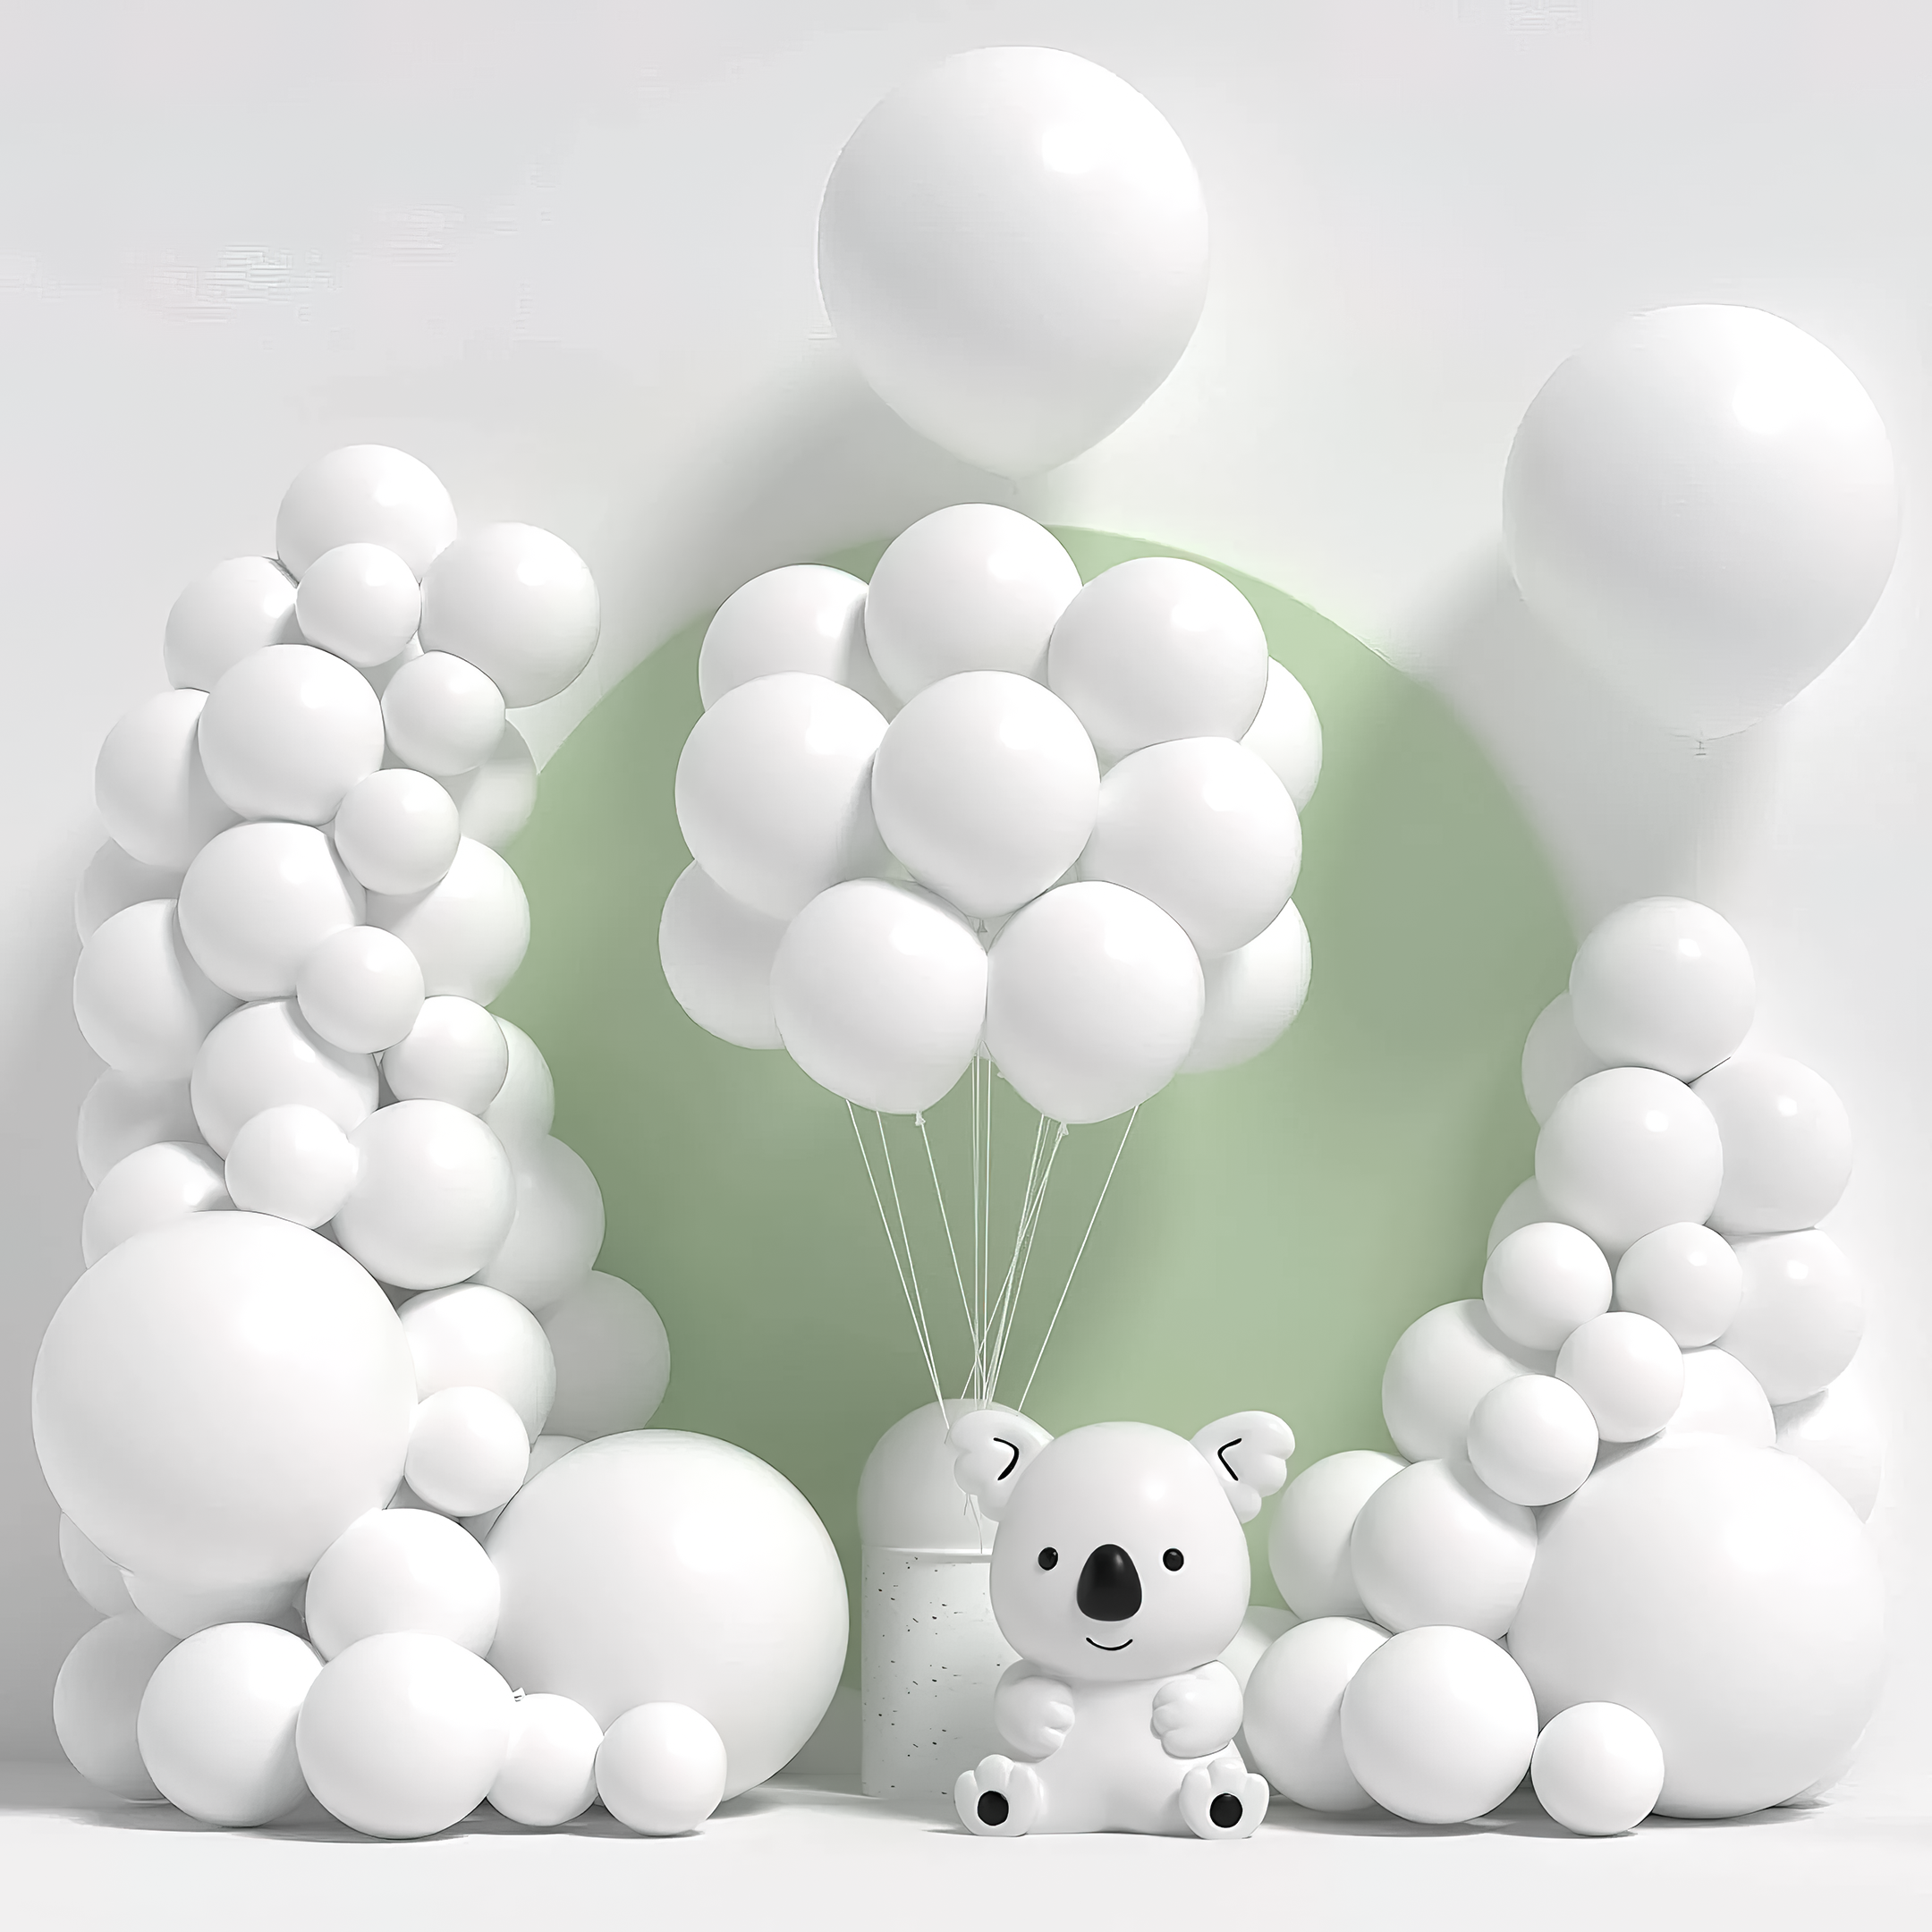 White Balloons for party decoration pack of 50 pcs